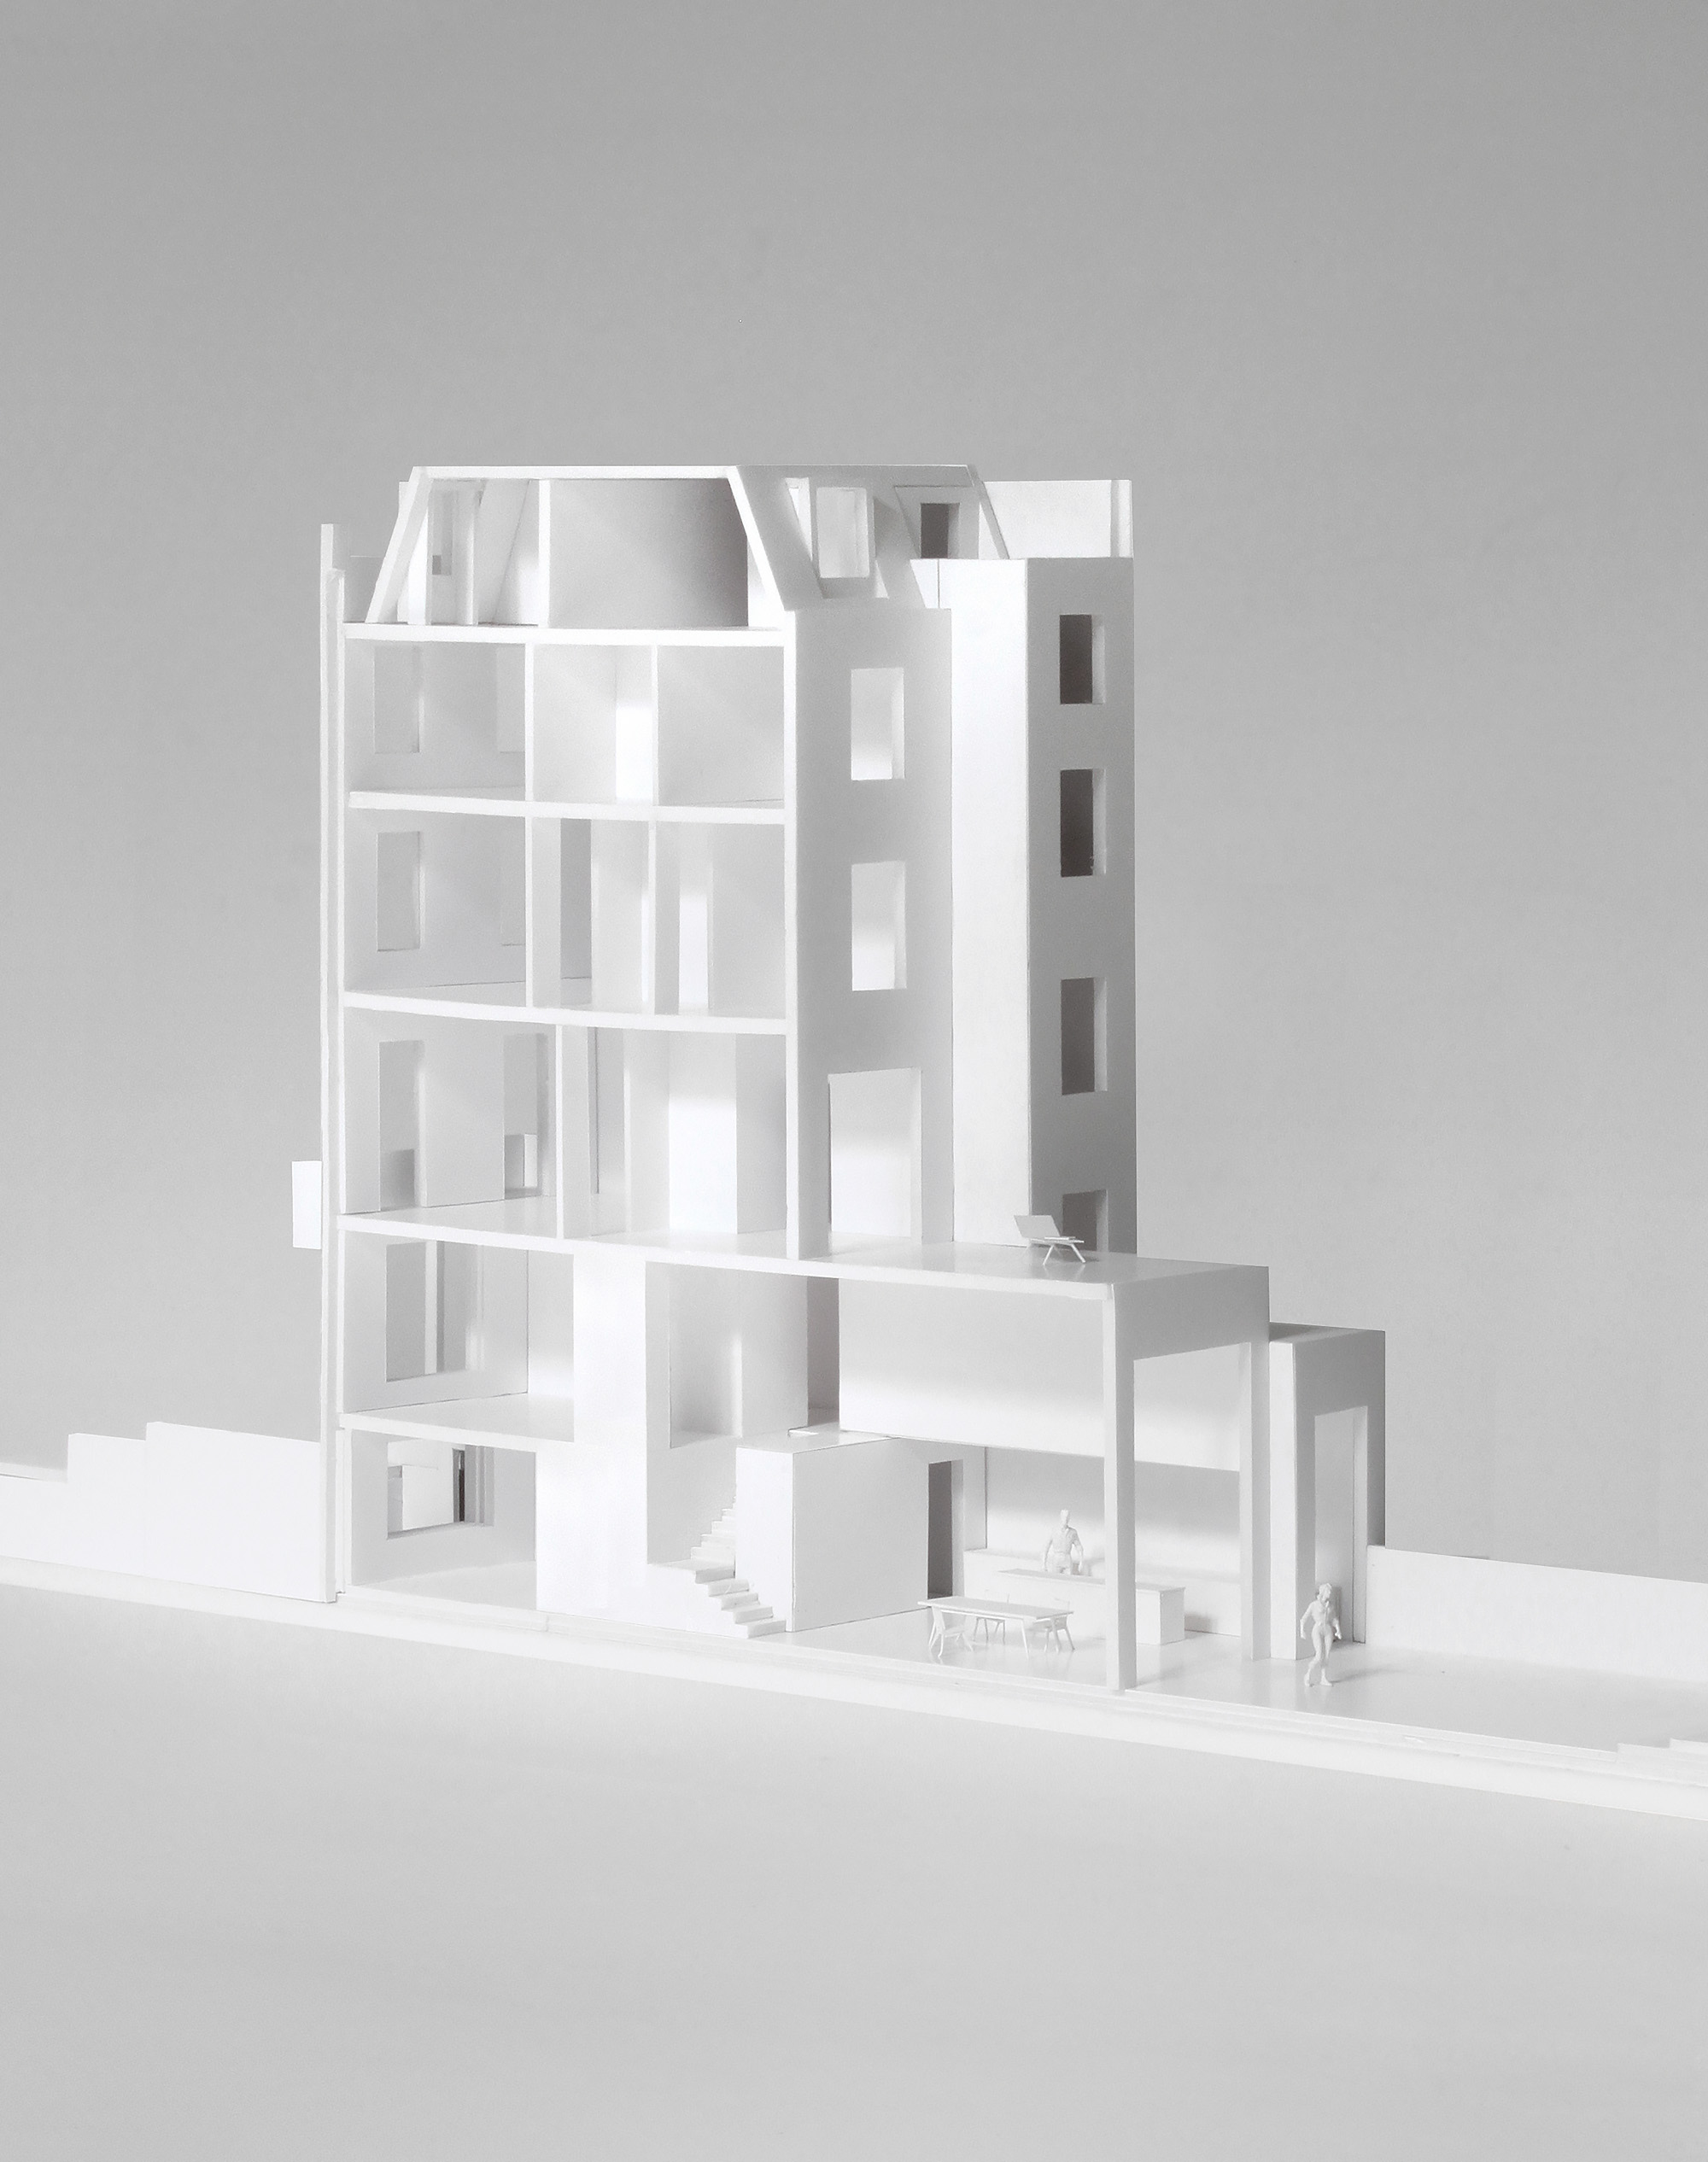 Erbar Mattes Architects Holland Park conversion and extension Phillimore Gardens Model